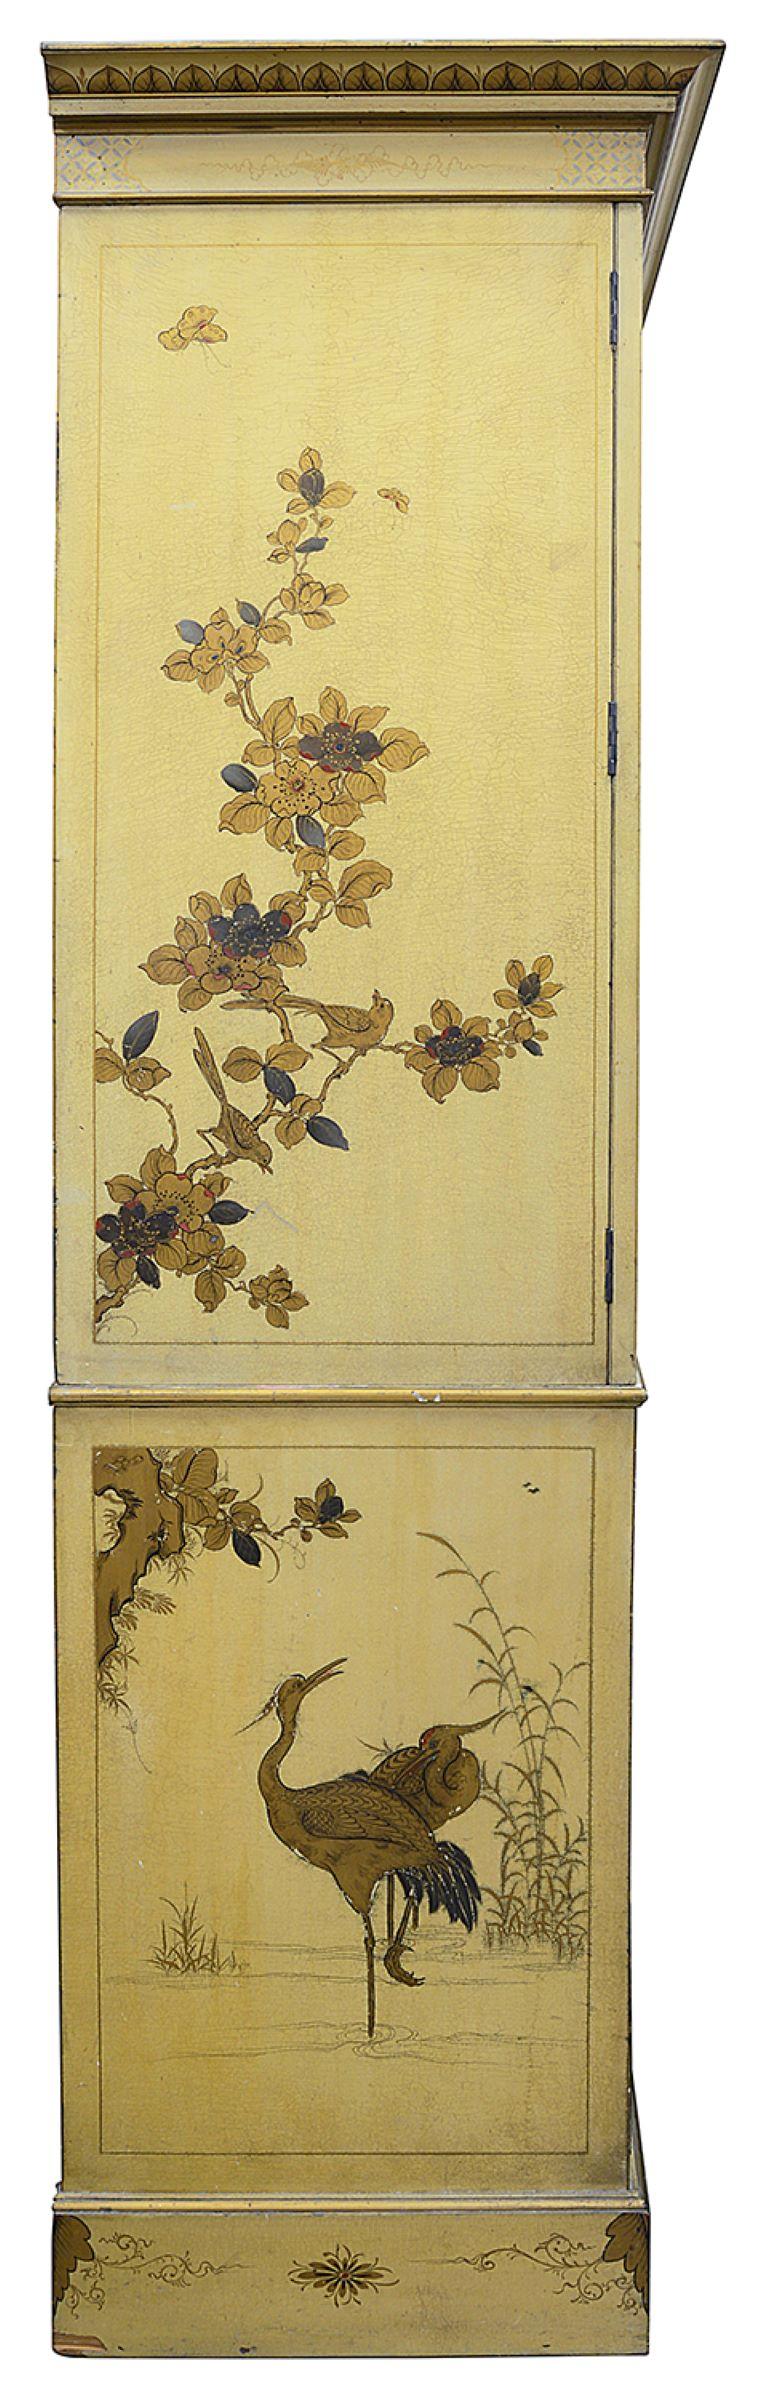 Hand-Painted 19th Century Chinoiserie Lacquer Linen Press, circa 1880 For Sale